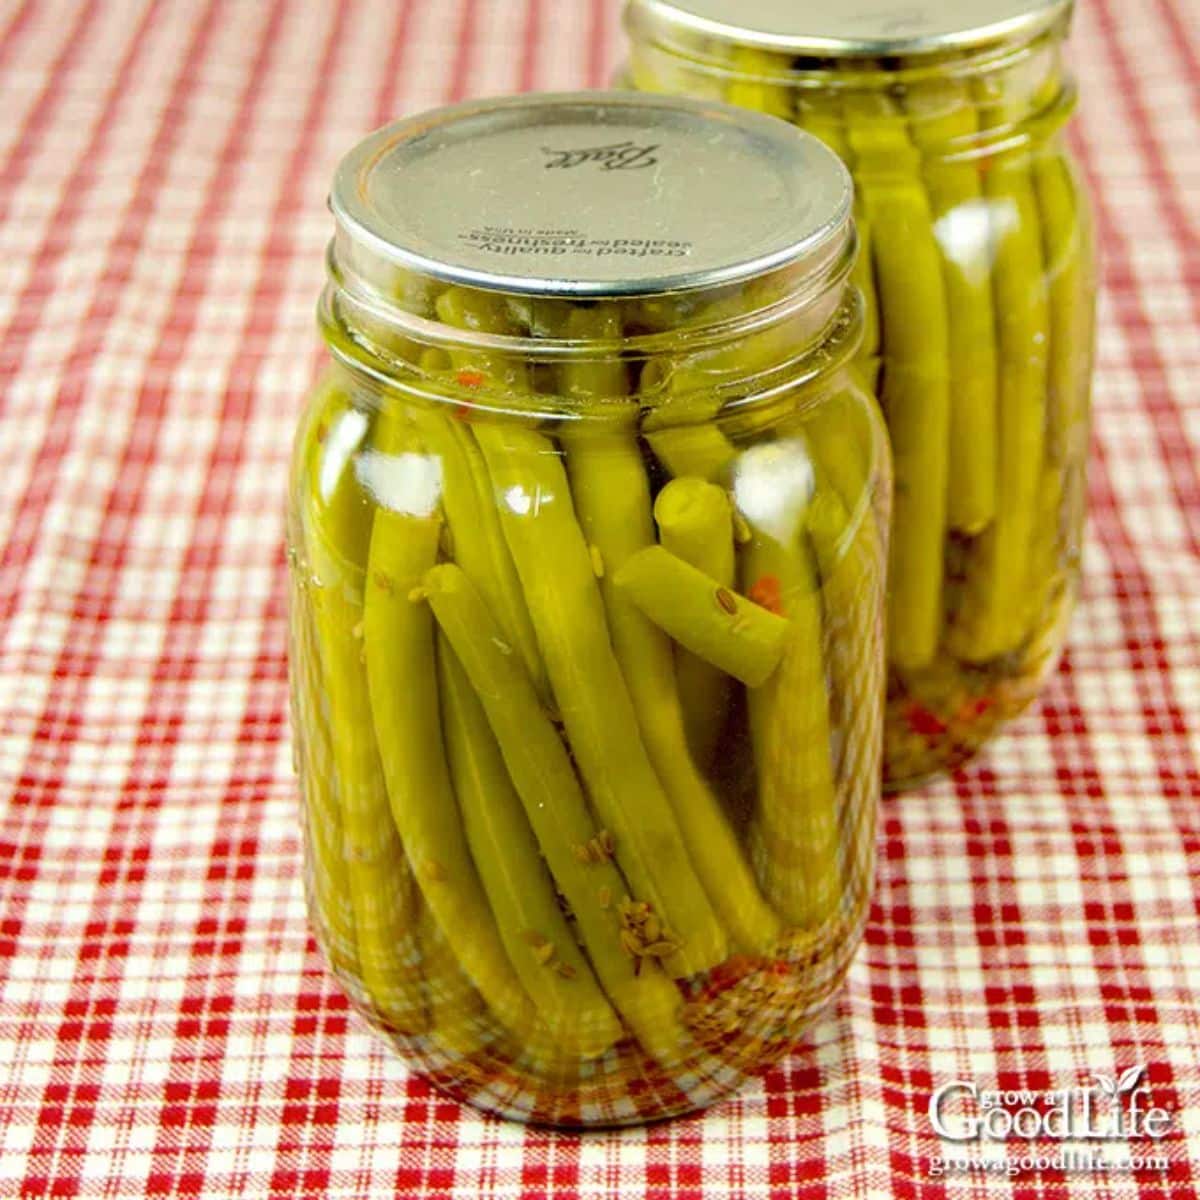 Amish pickled green beans in glass jars.